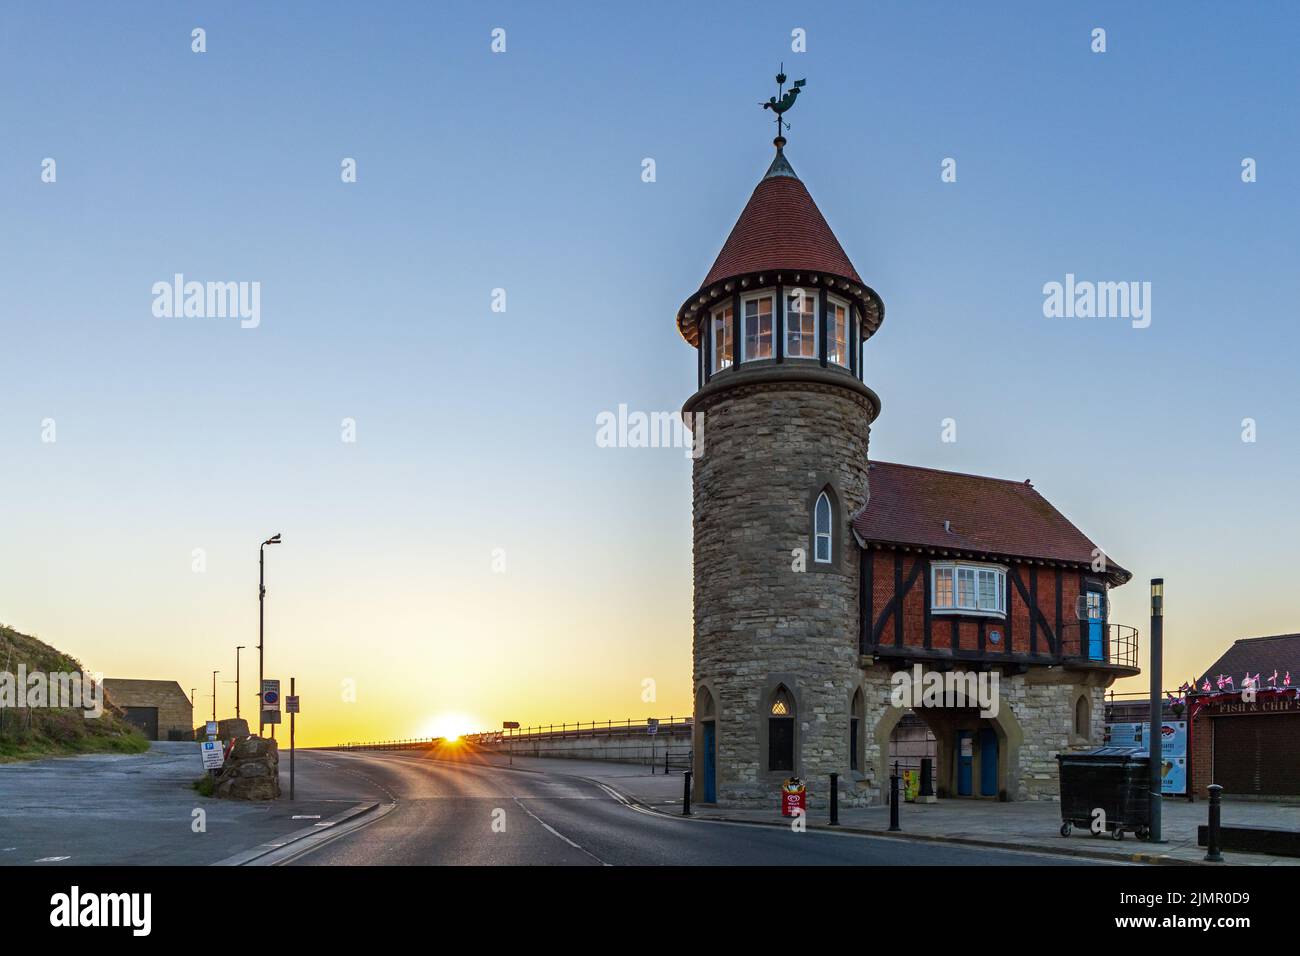 The South Toll House on Marine Drive in Scarbrough, North Yorkshire, England. Taken at sunrise. Stock Photo